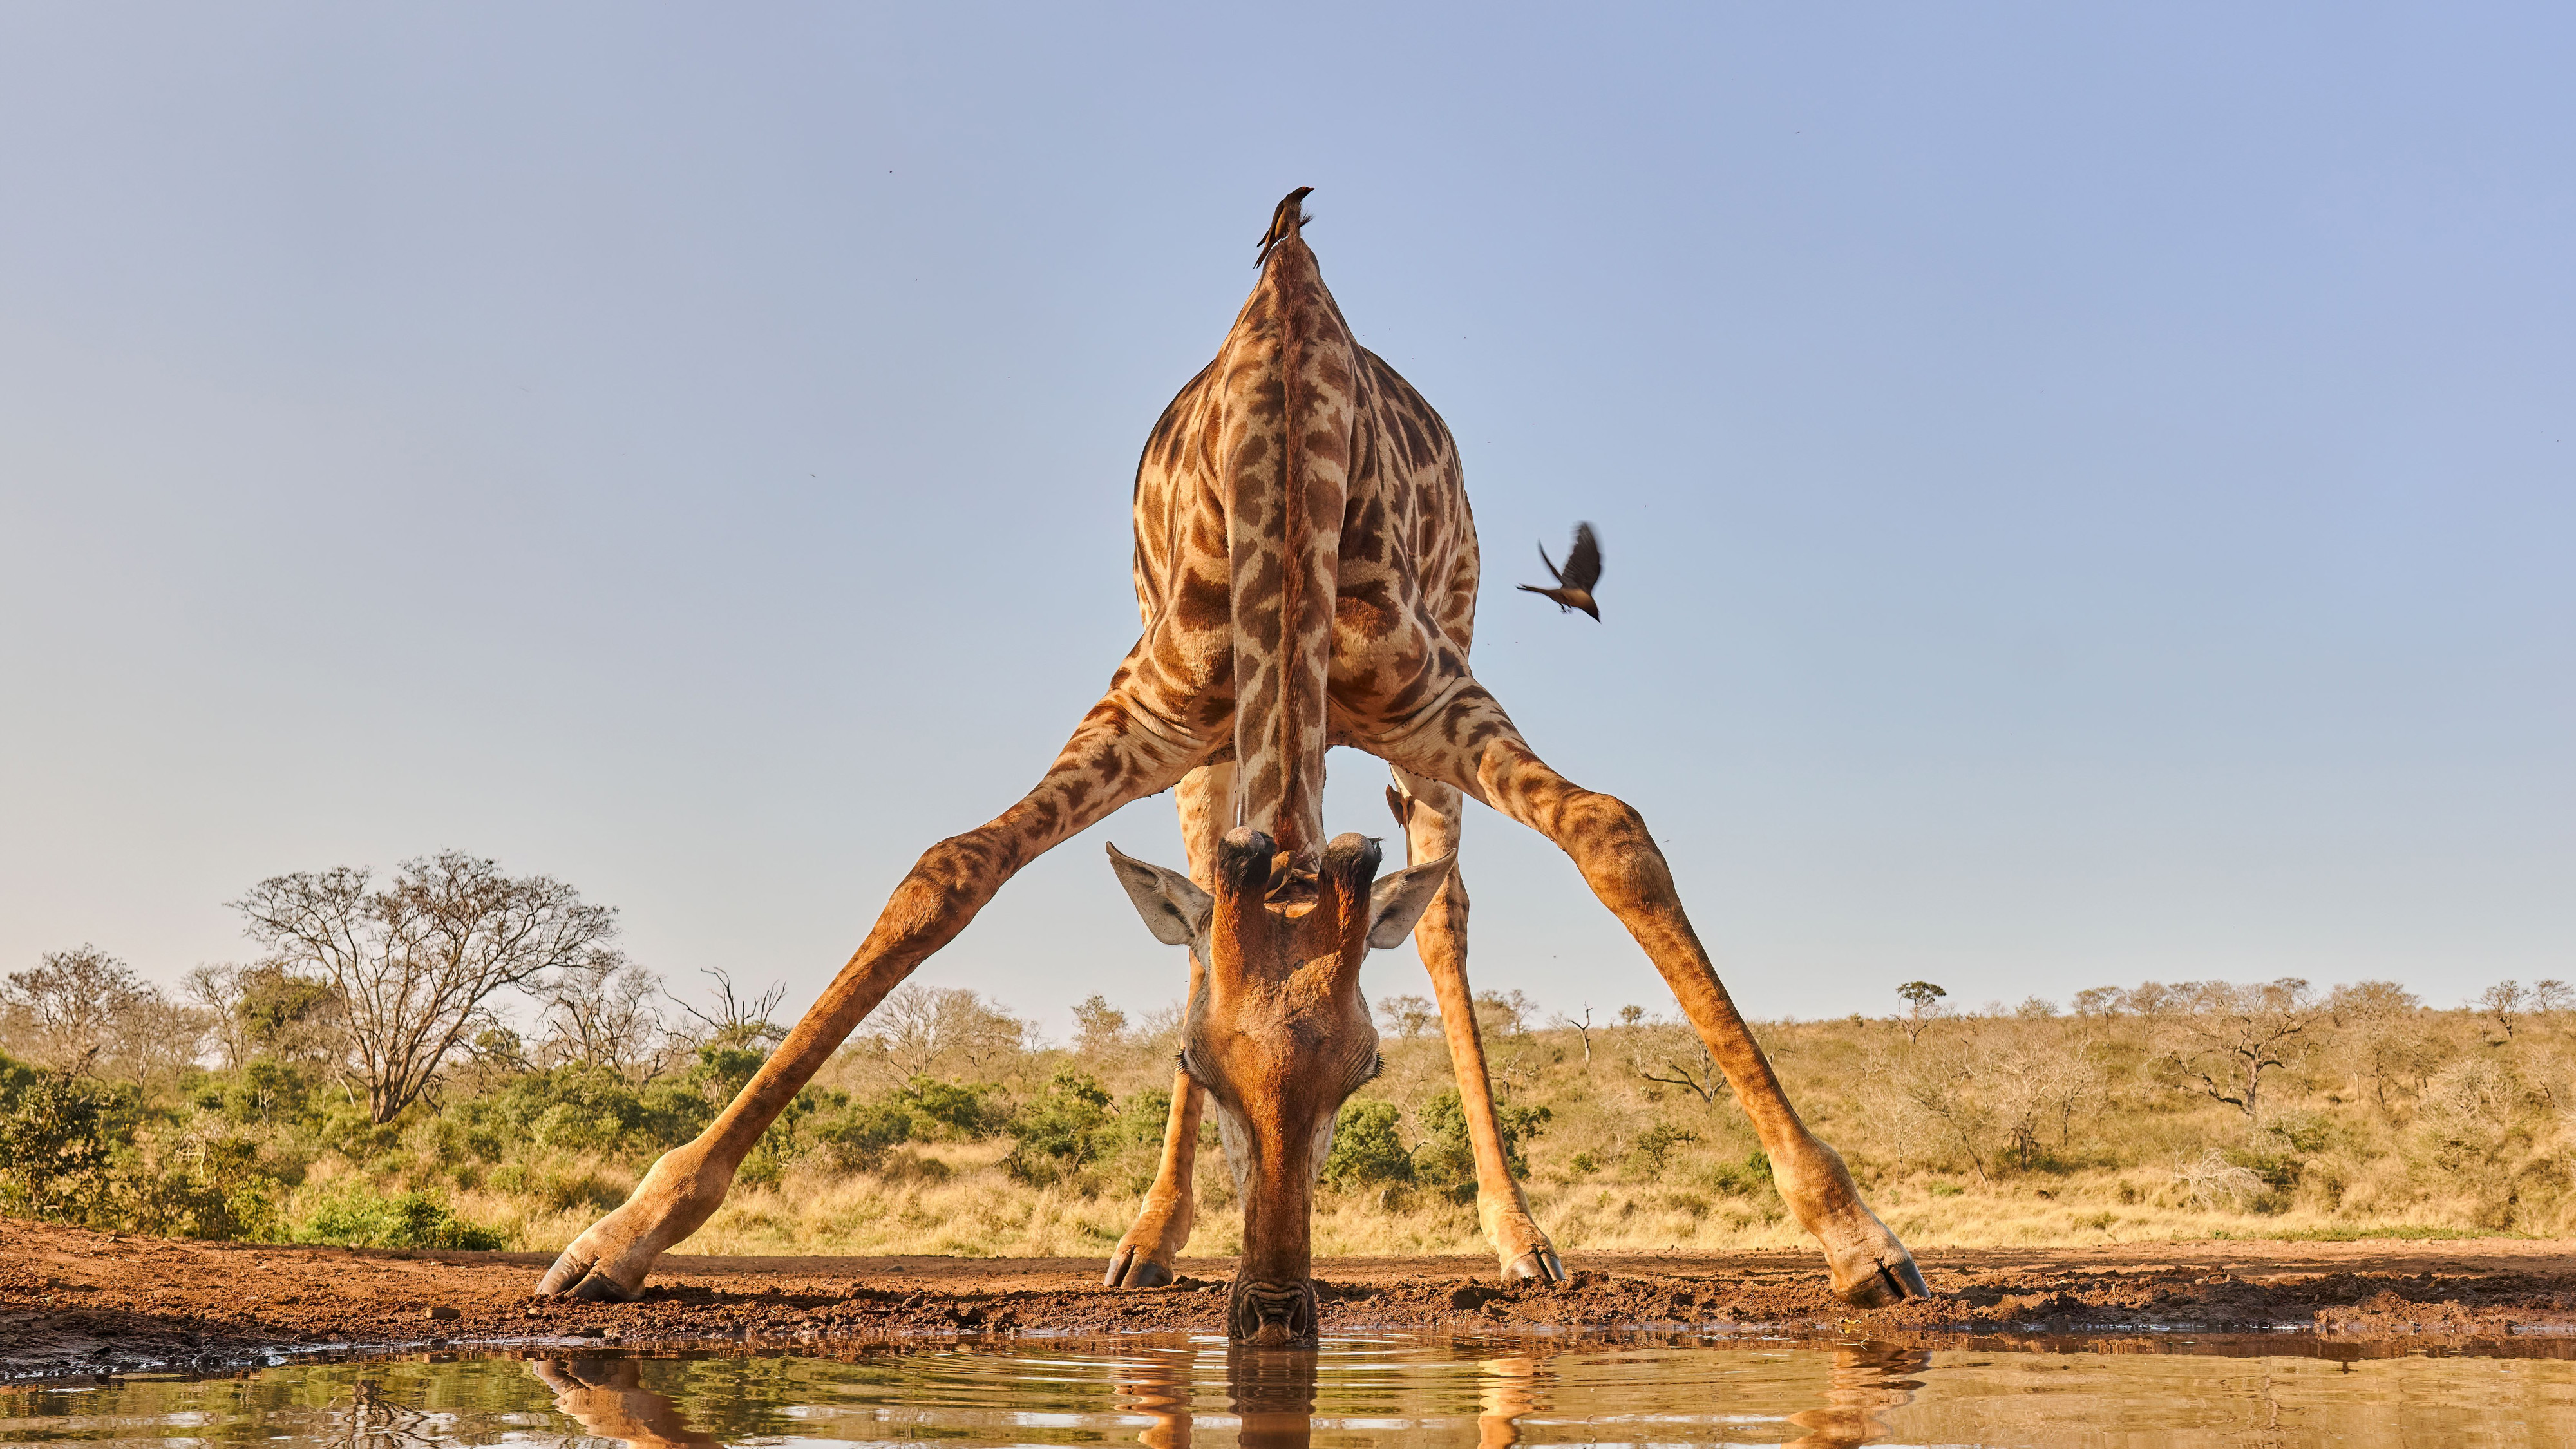 'Giraffe Drinking'. Low angle shot of a giraffe drinking at a waterhole, accompanied by an oxpecker. Zimanga Private Game Reserve, South Africa. © Jenny Zhao/TNC Photo Contest